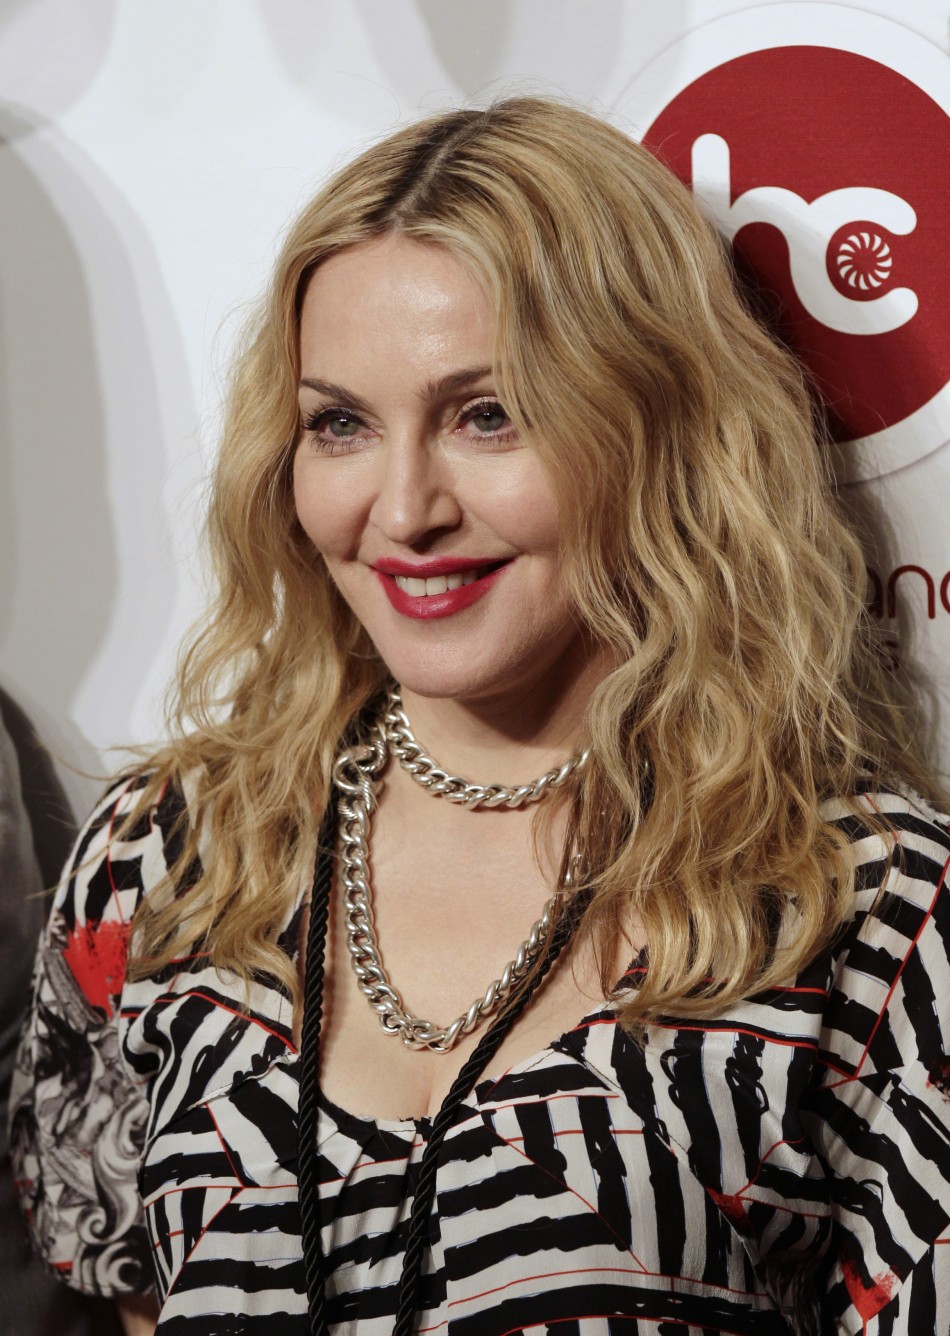 Madonna arrives to open Hard Candy Fitness gym in Mexico City, November 29, 2010.